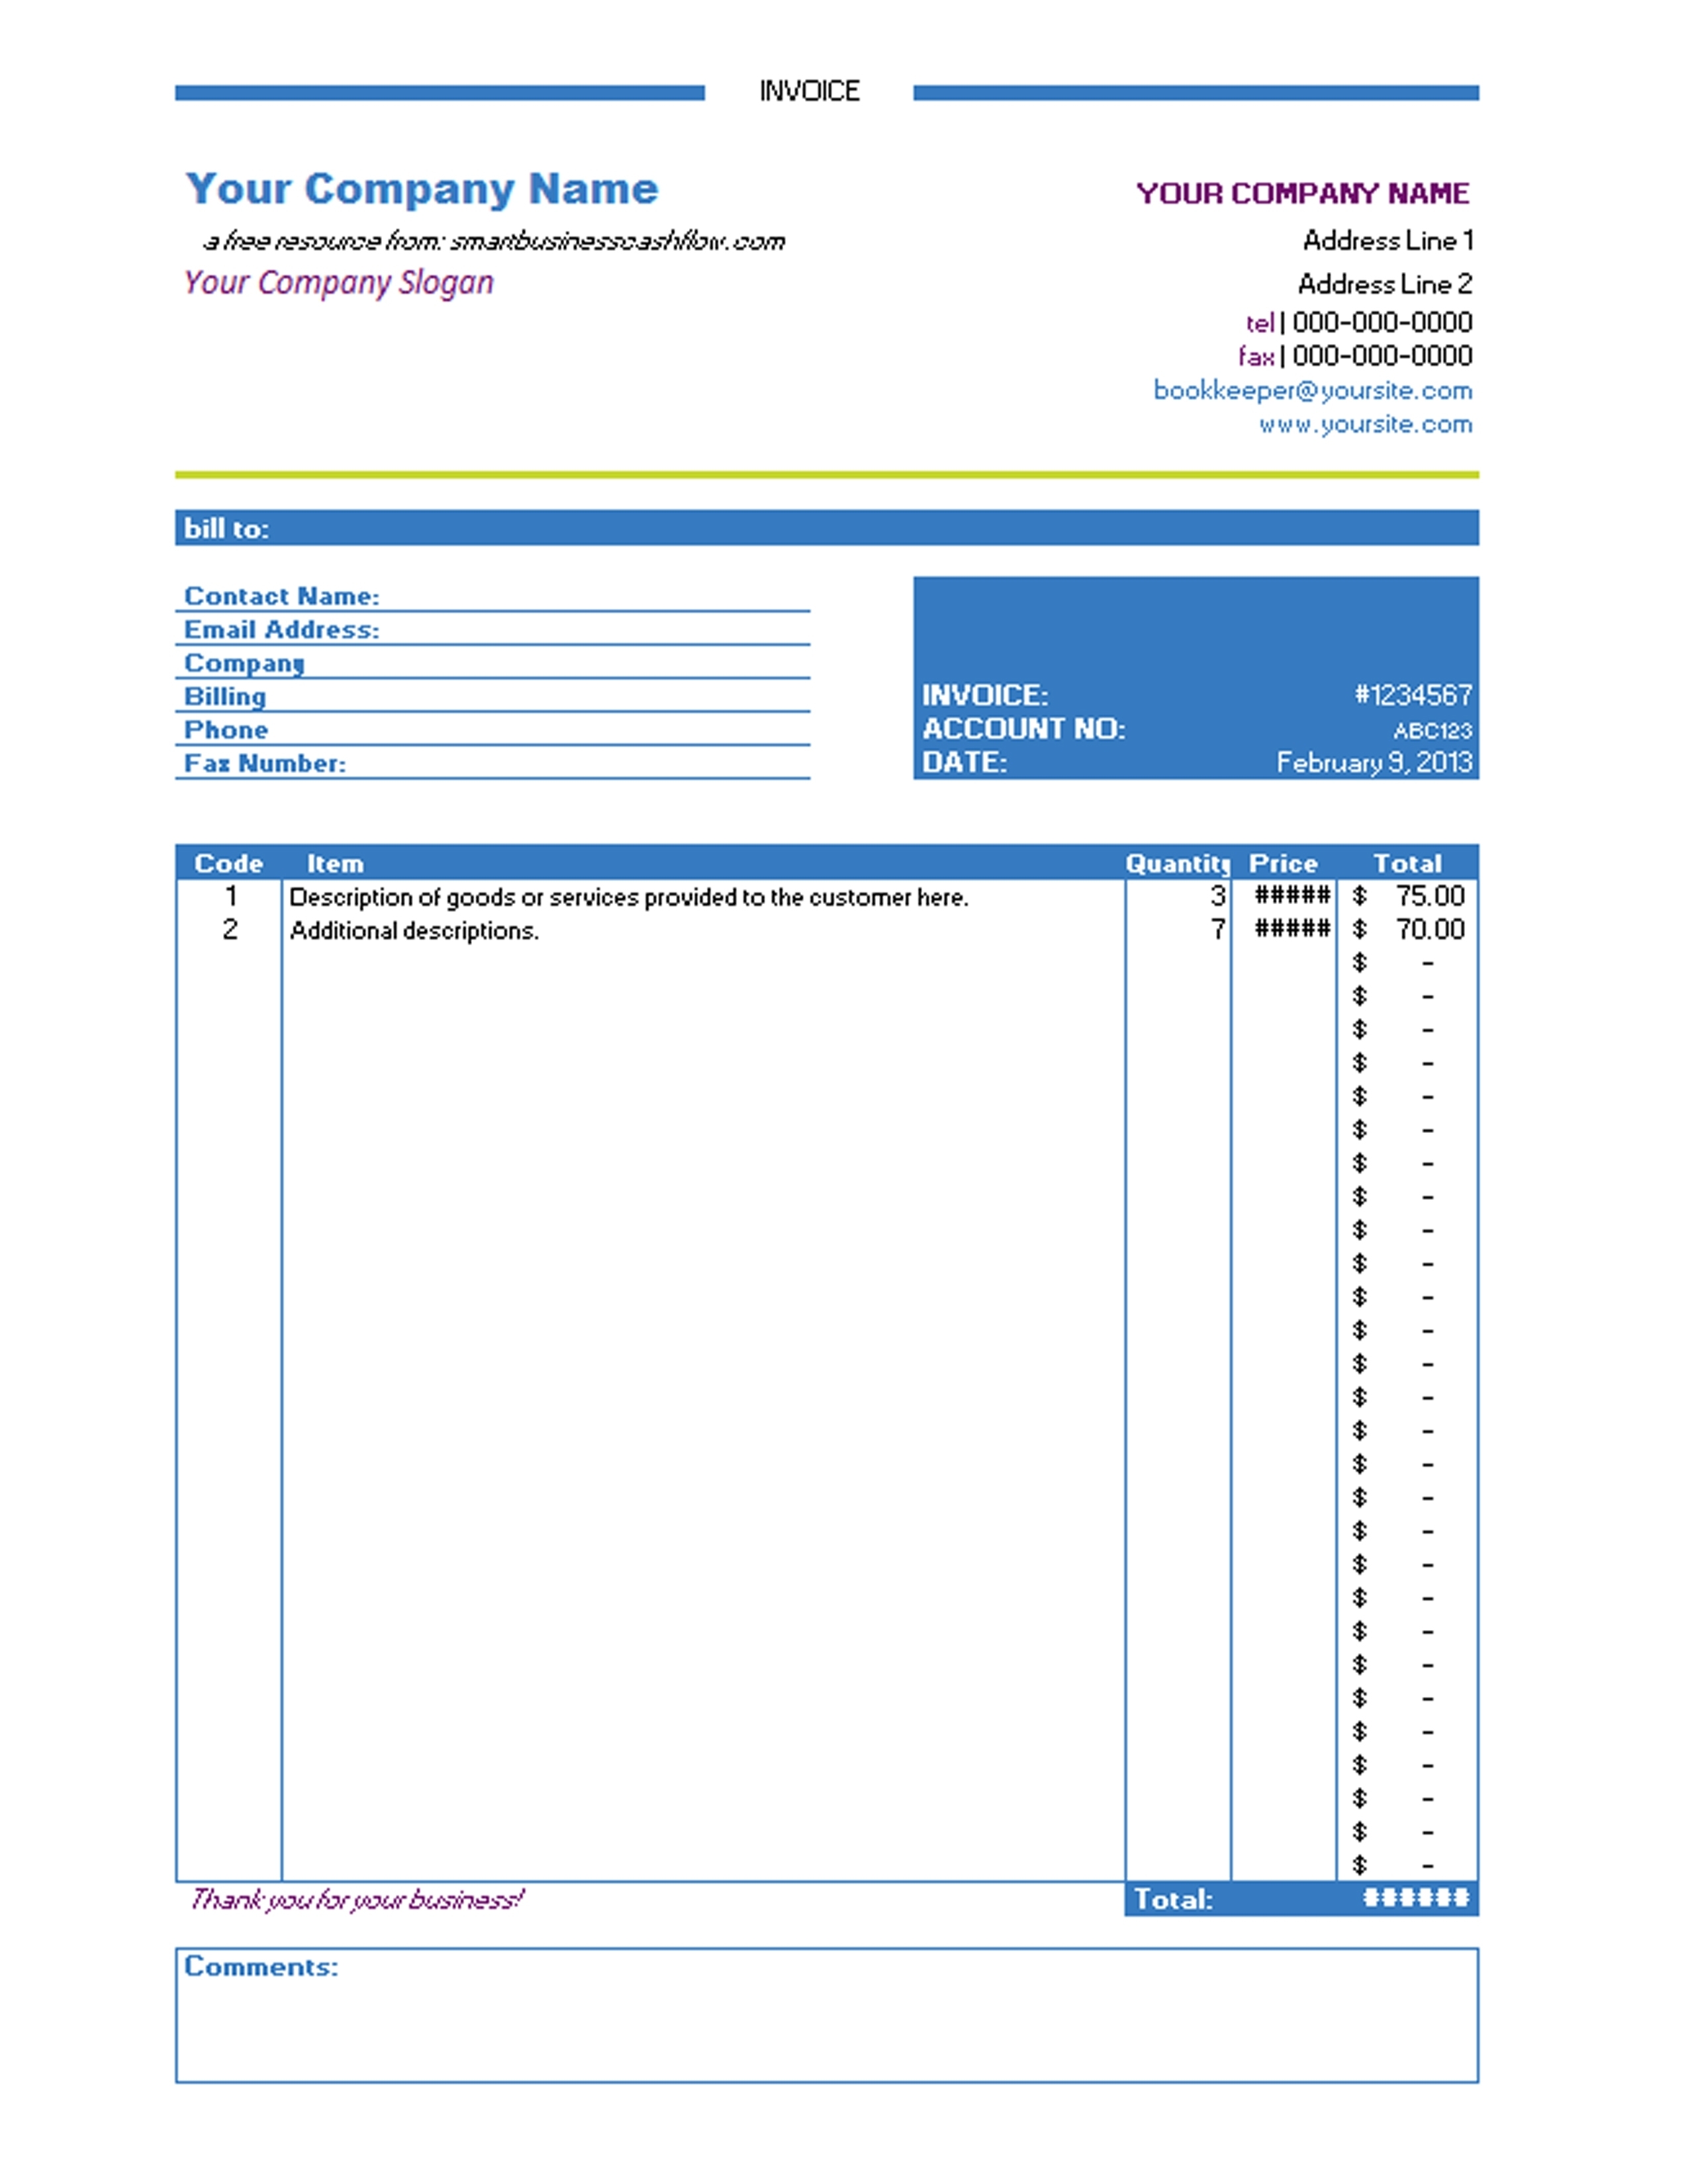 Creating An Invoice In Excel Invoice Template Ideas